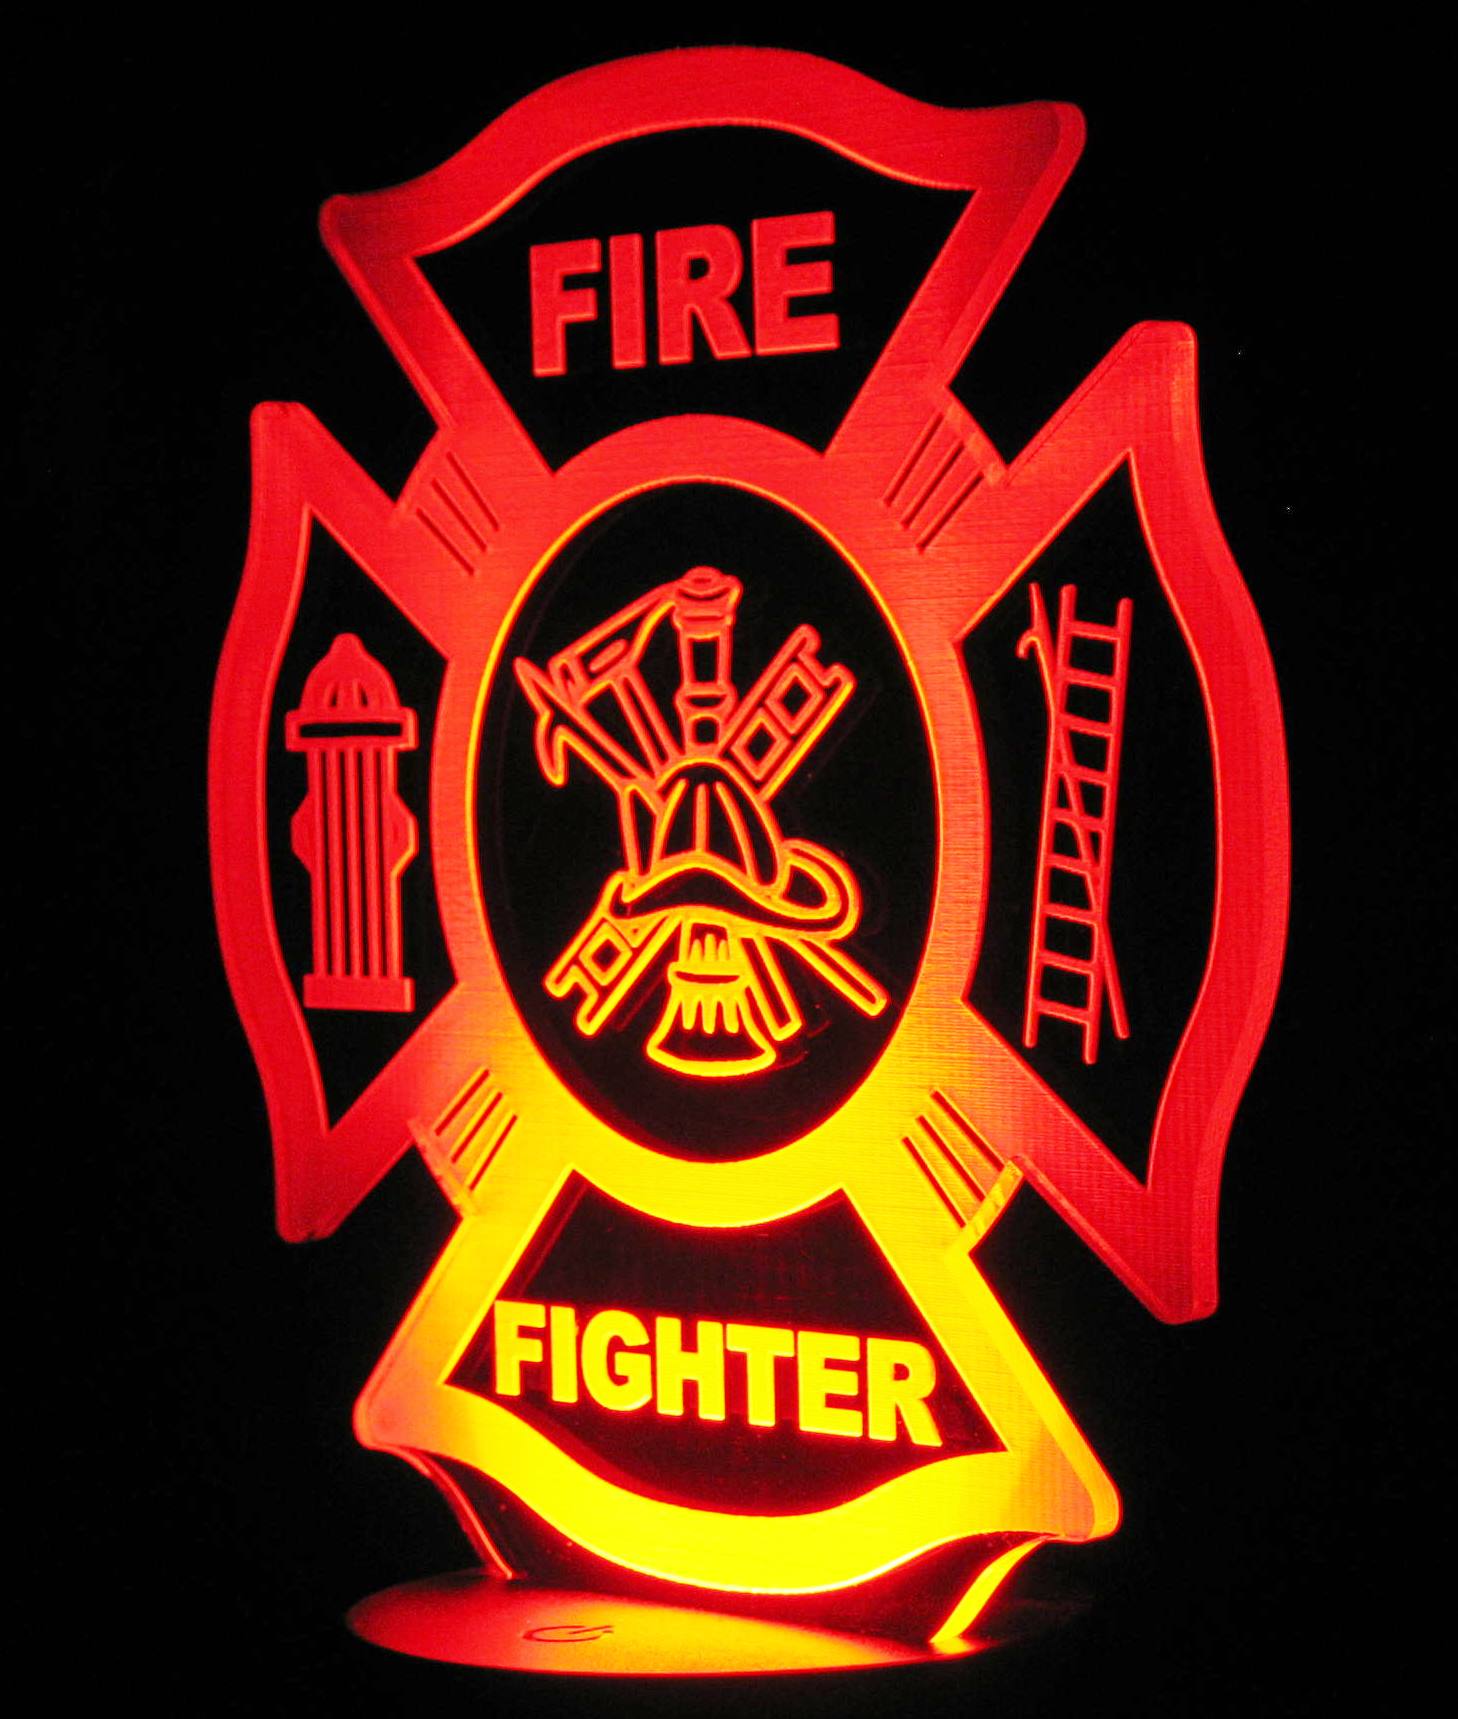 Firefighter Logo 3-D Optical Illusion Multicolored LED Lamp